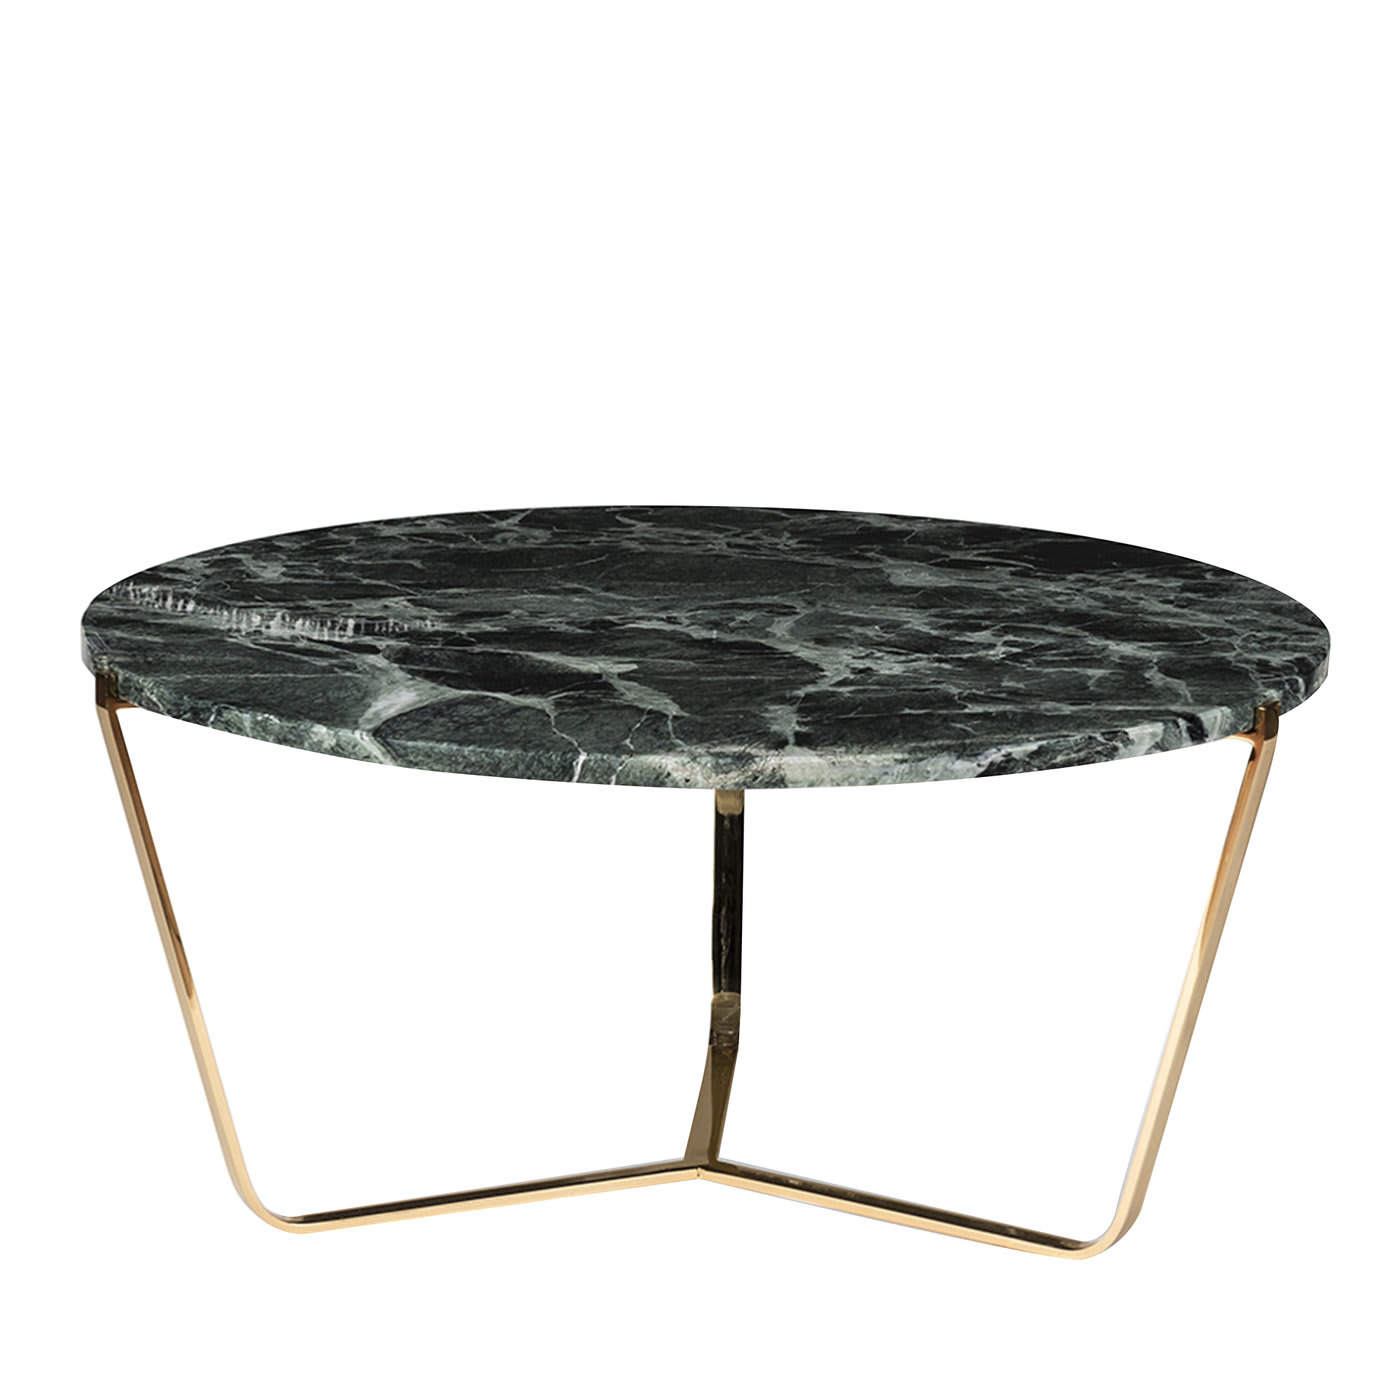 Dolomiti Green Alps Marble Tall Coffee Table - VGnewtrend